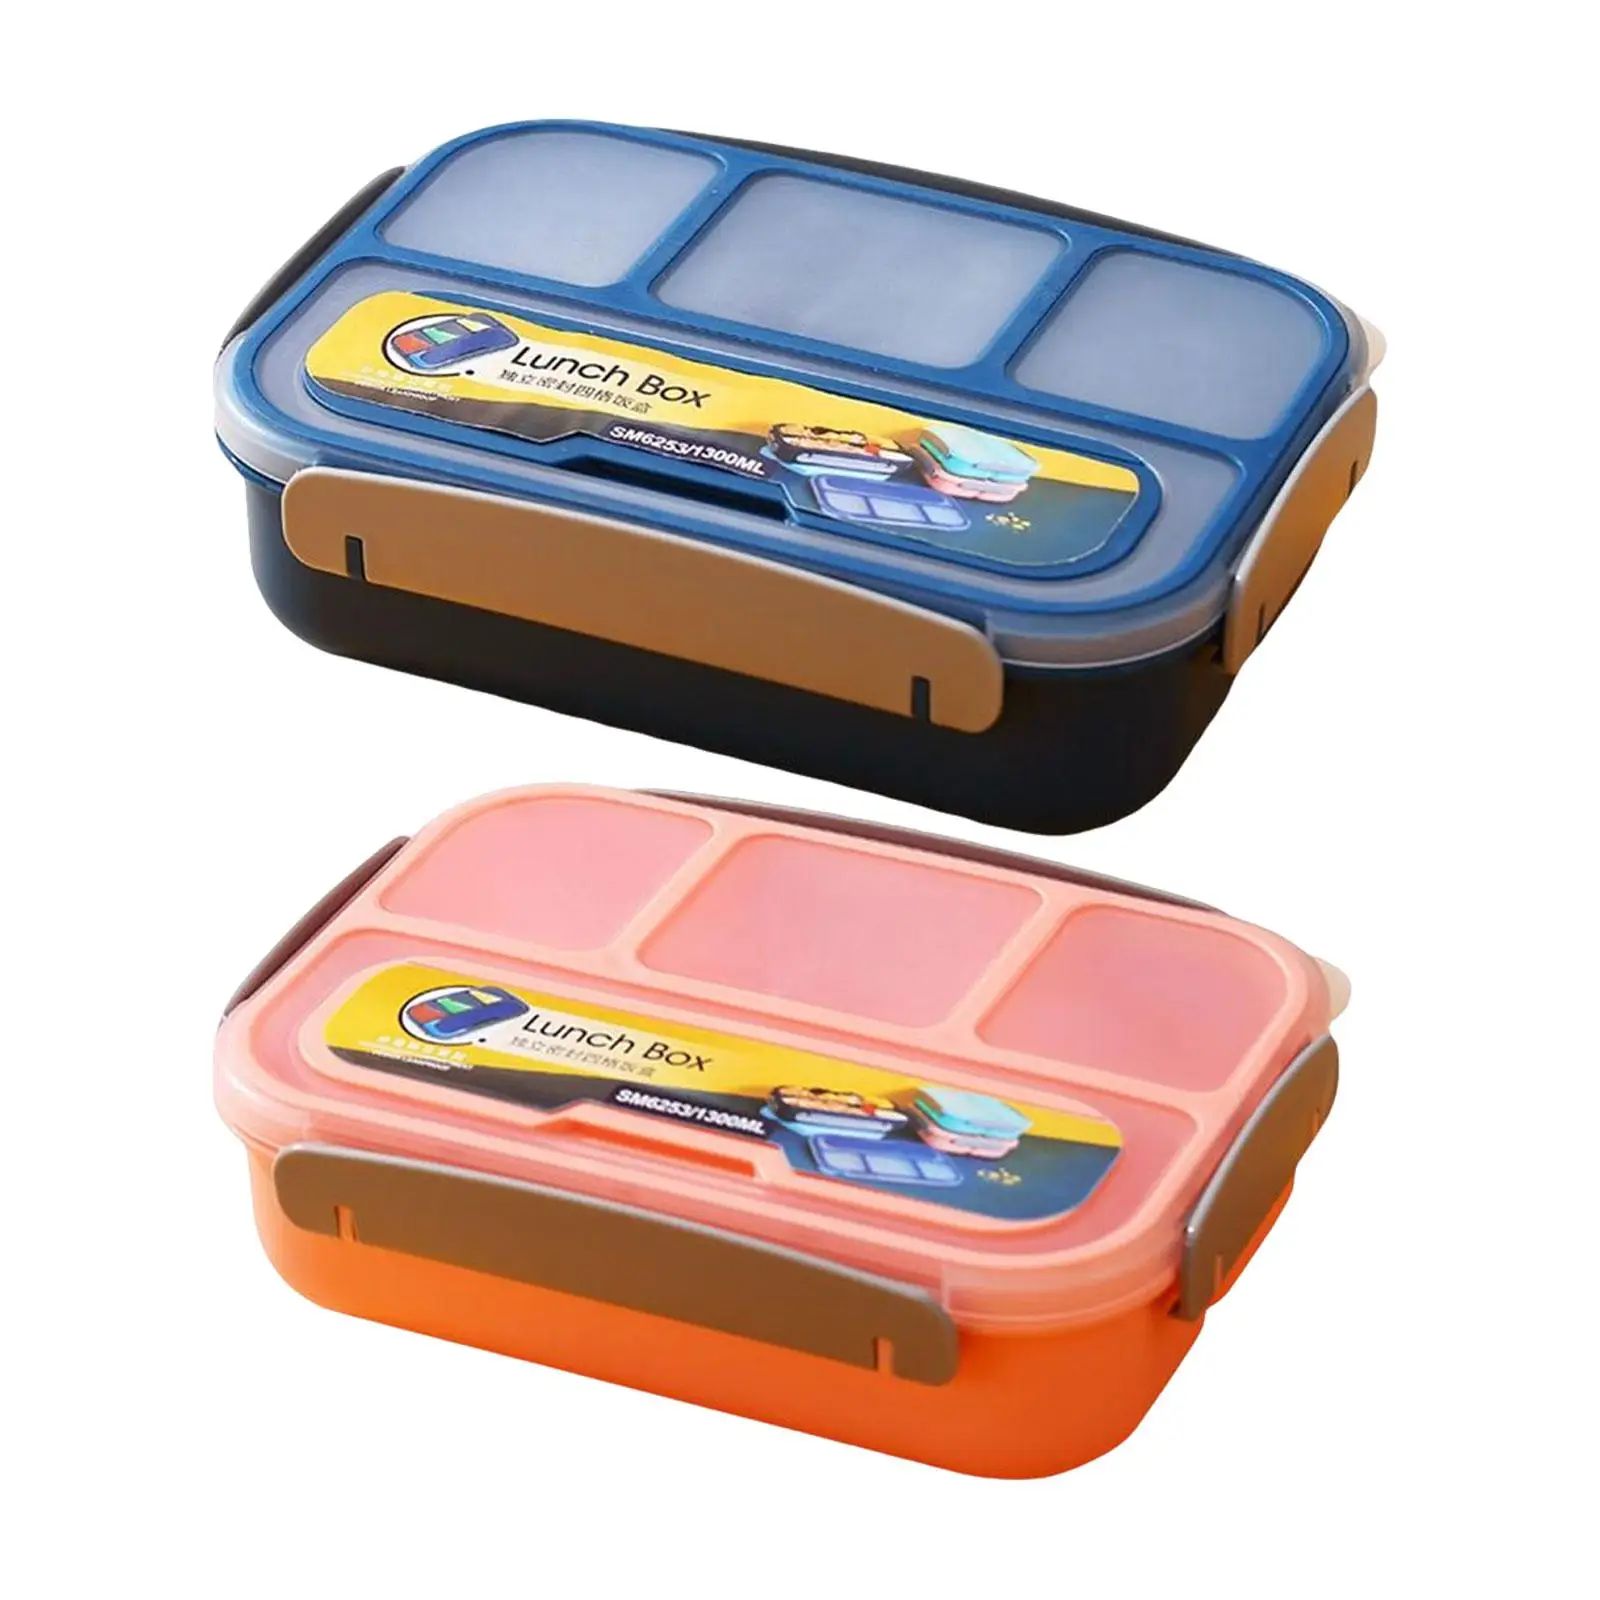 Lunch Box Container Bento Lunch Box Fruits Storage Box Lunch Container for Picnic Travel